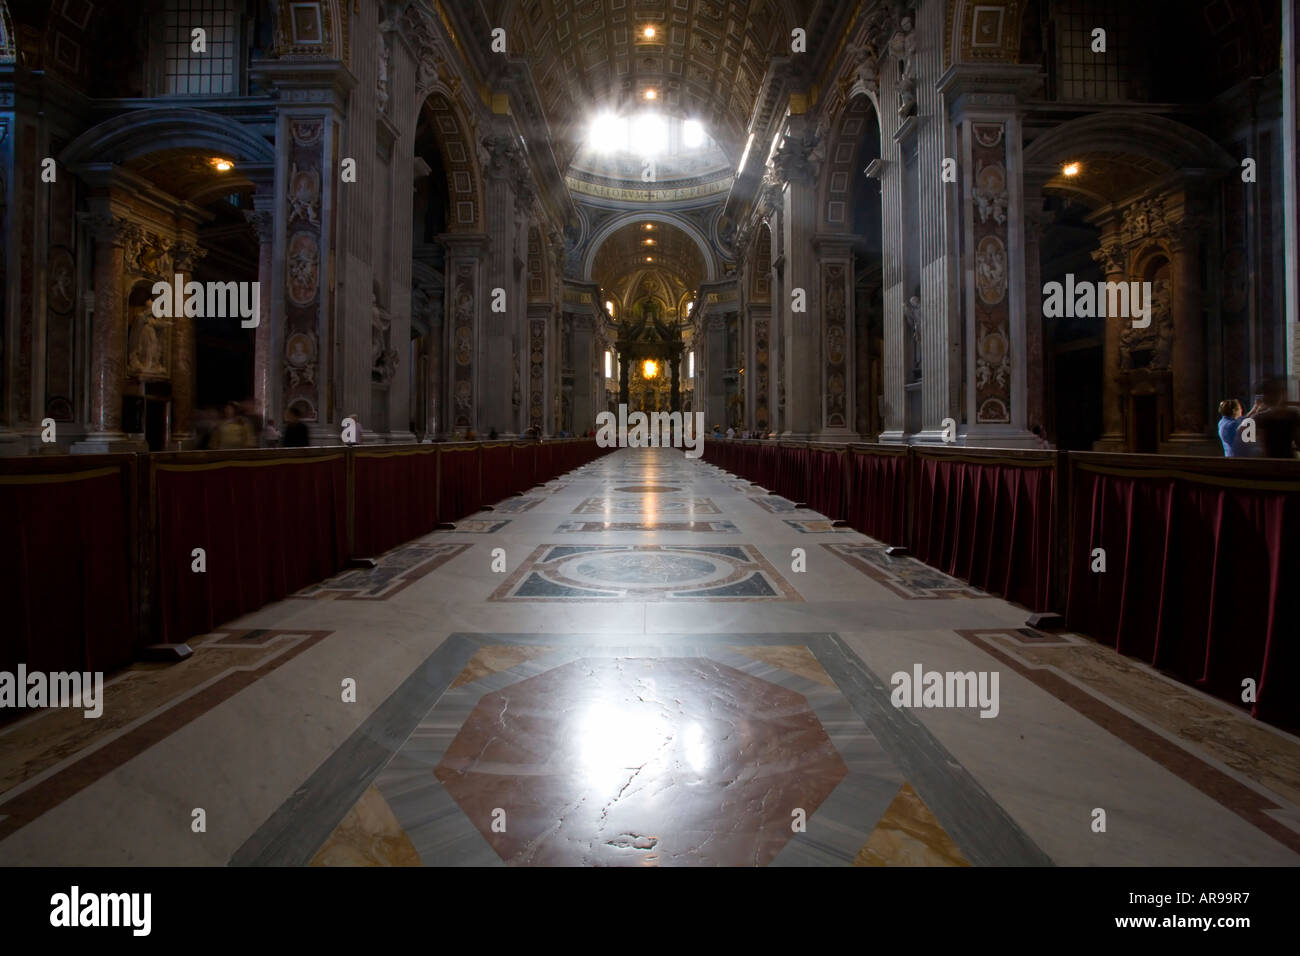 The interior of St Peters Church in the Vatican City Rome Italy Stock Photo